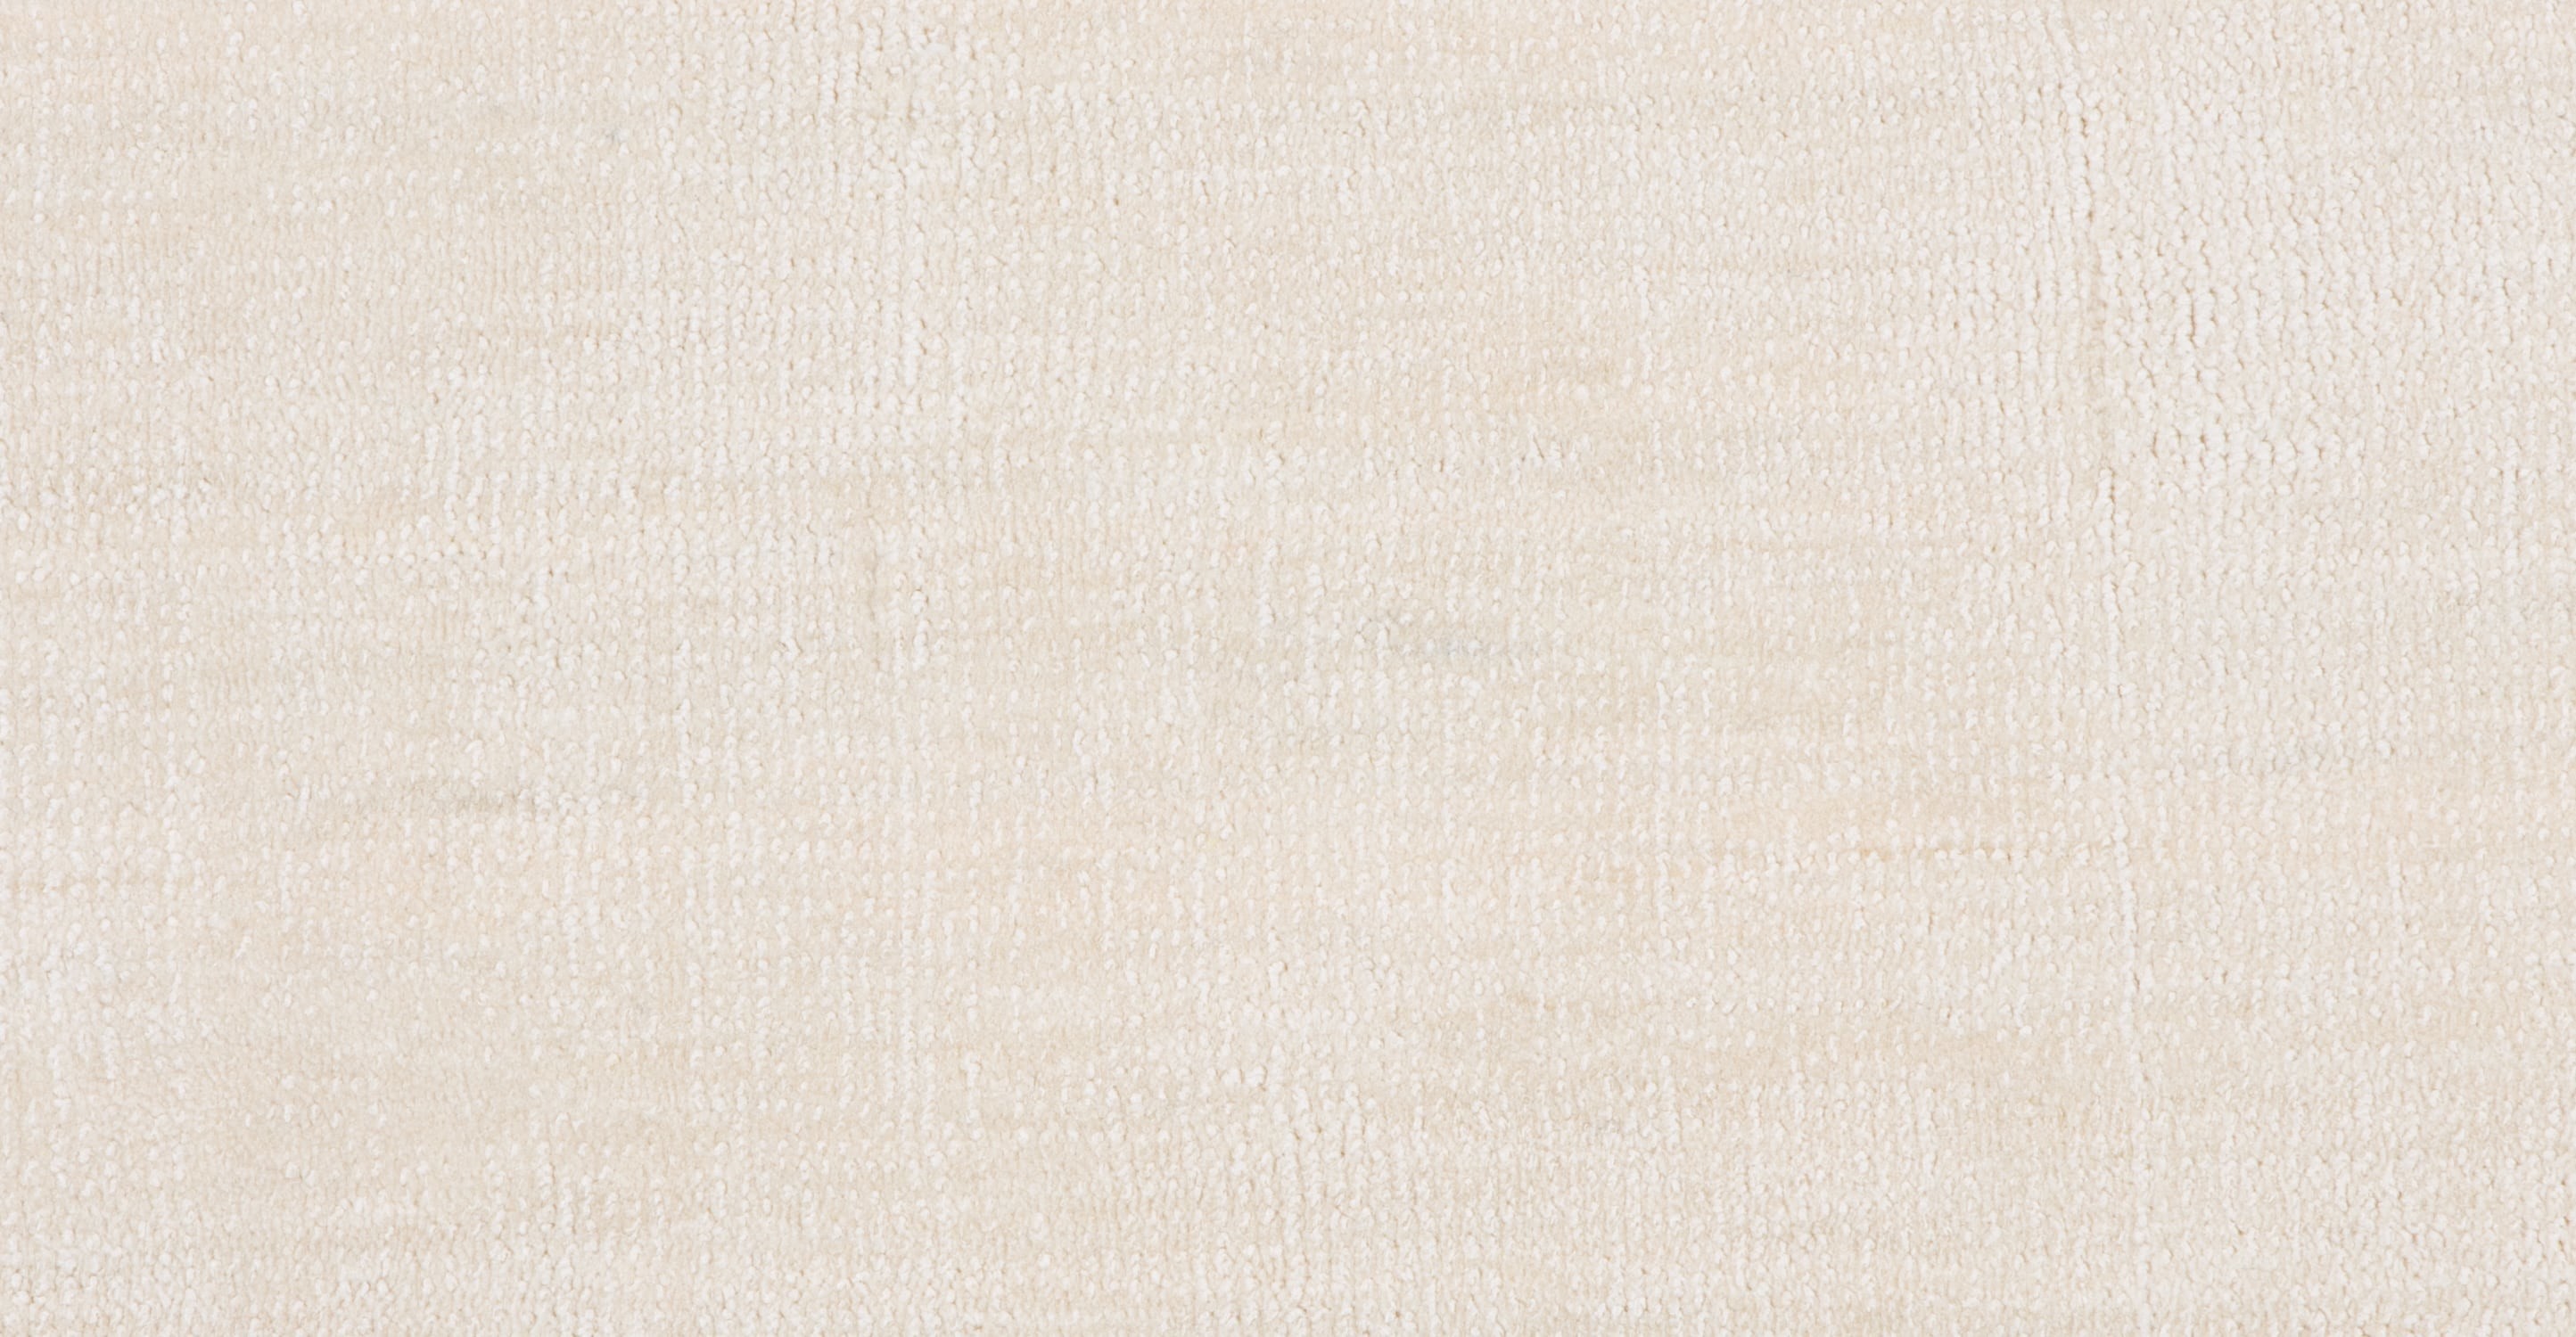 2889x1500 A rug, in Off White 120 x 170cm